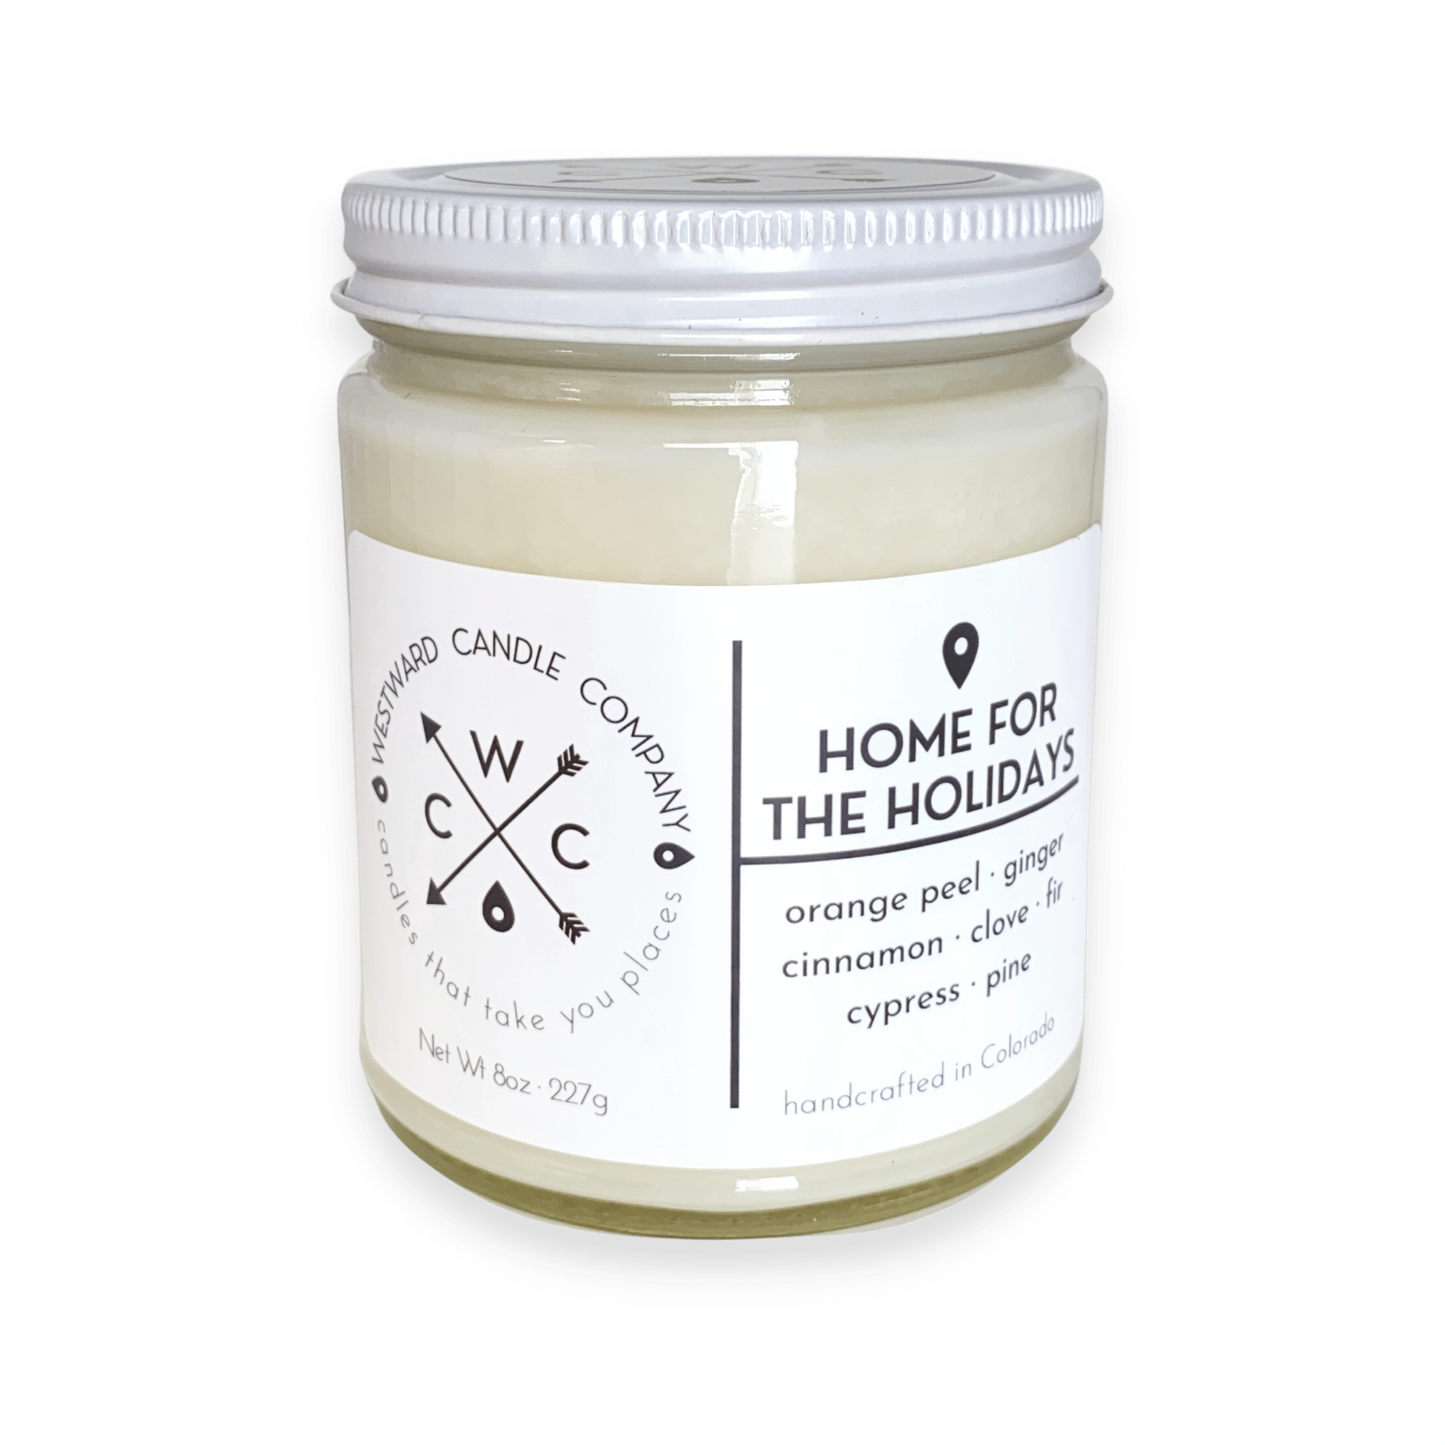 Home for the Holidays Soy Candle. Whether you're spending the holidays at home with family, gathering with friends, or relaxing on your own, you'll feel right at home and in the holiday spirit with Westward's Home for the Holidays soy candle. Gender-neutral design, handmade in Colorado with 100% soy wax, 100% soy wax, phthalate-free fragrance oil and a blend of essential oils.